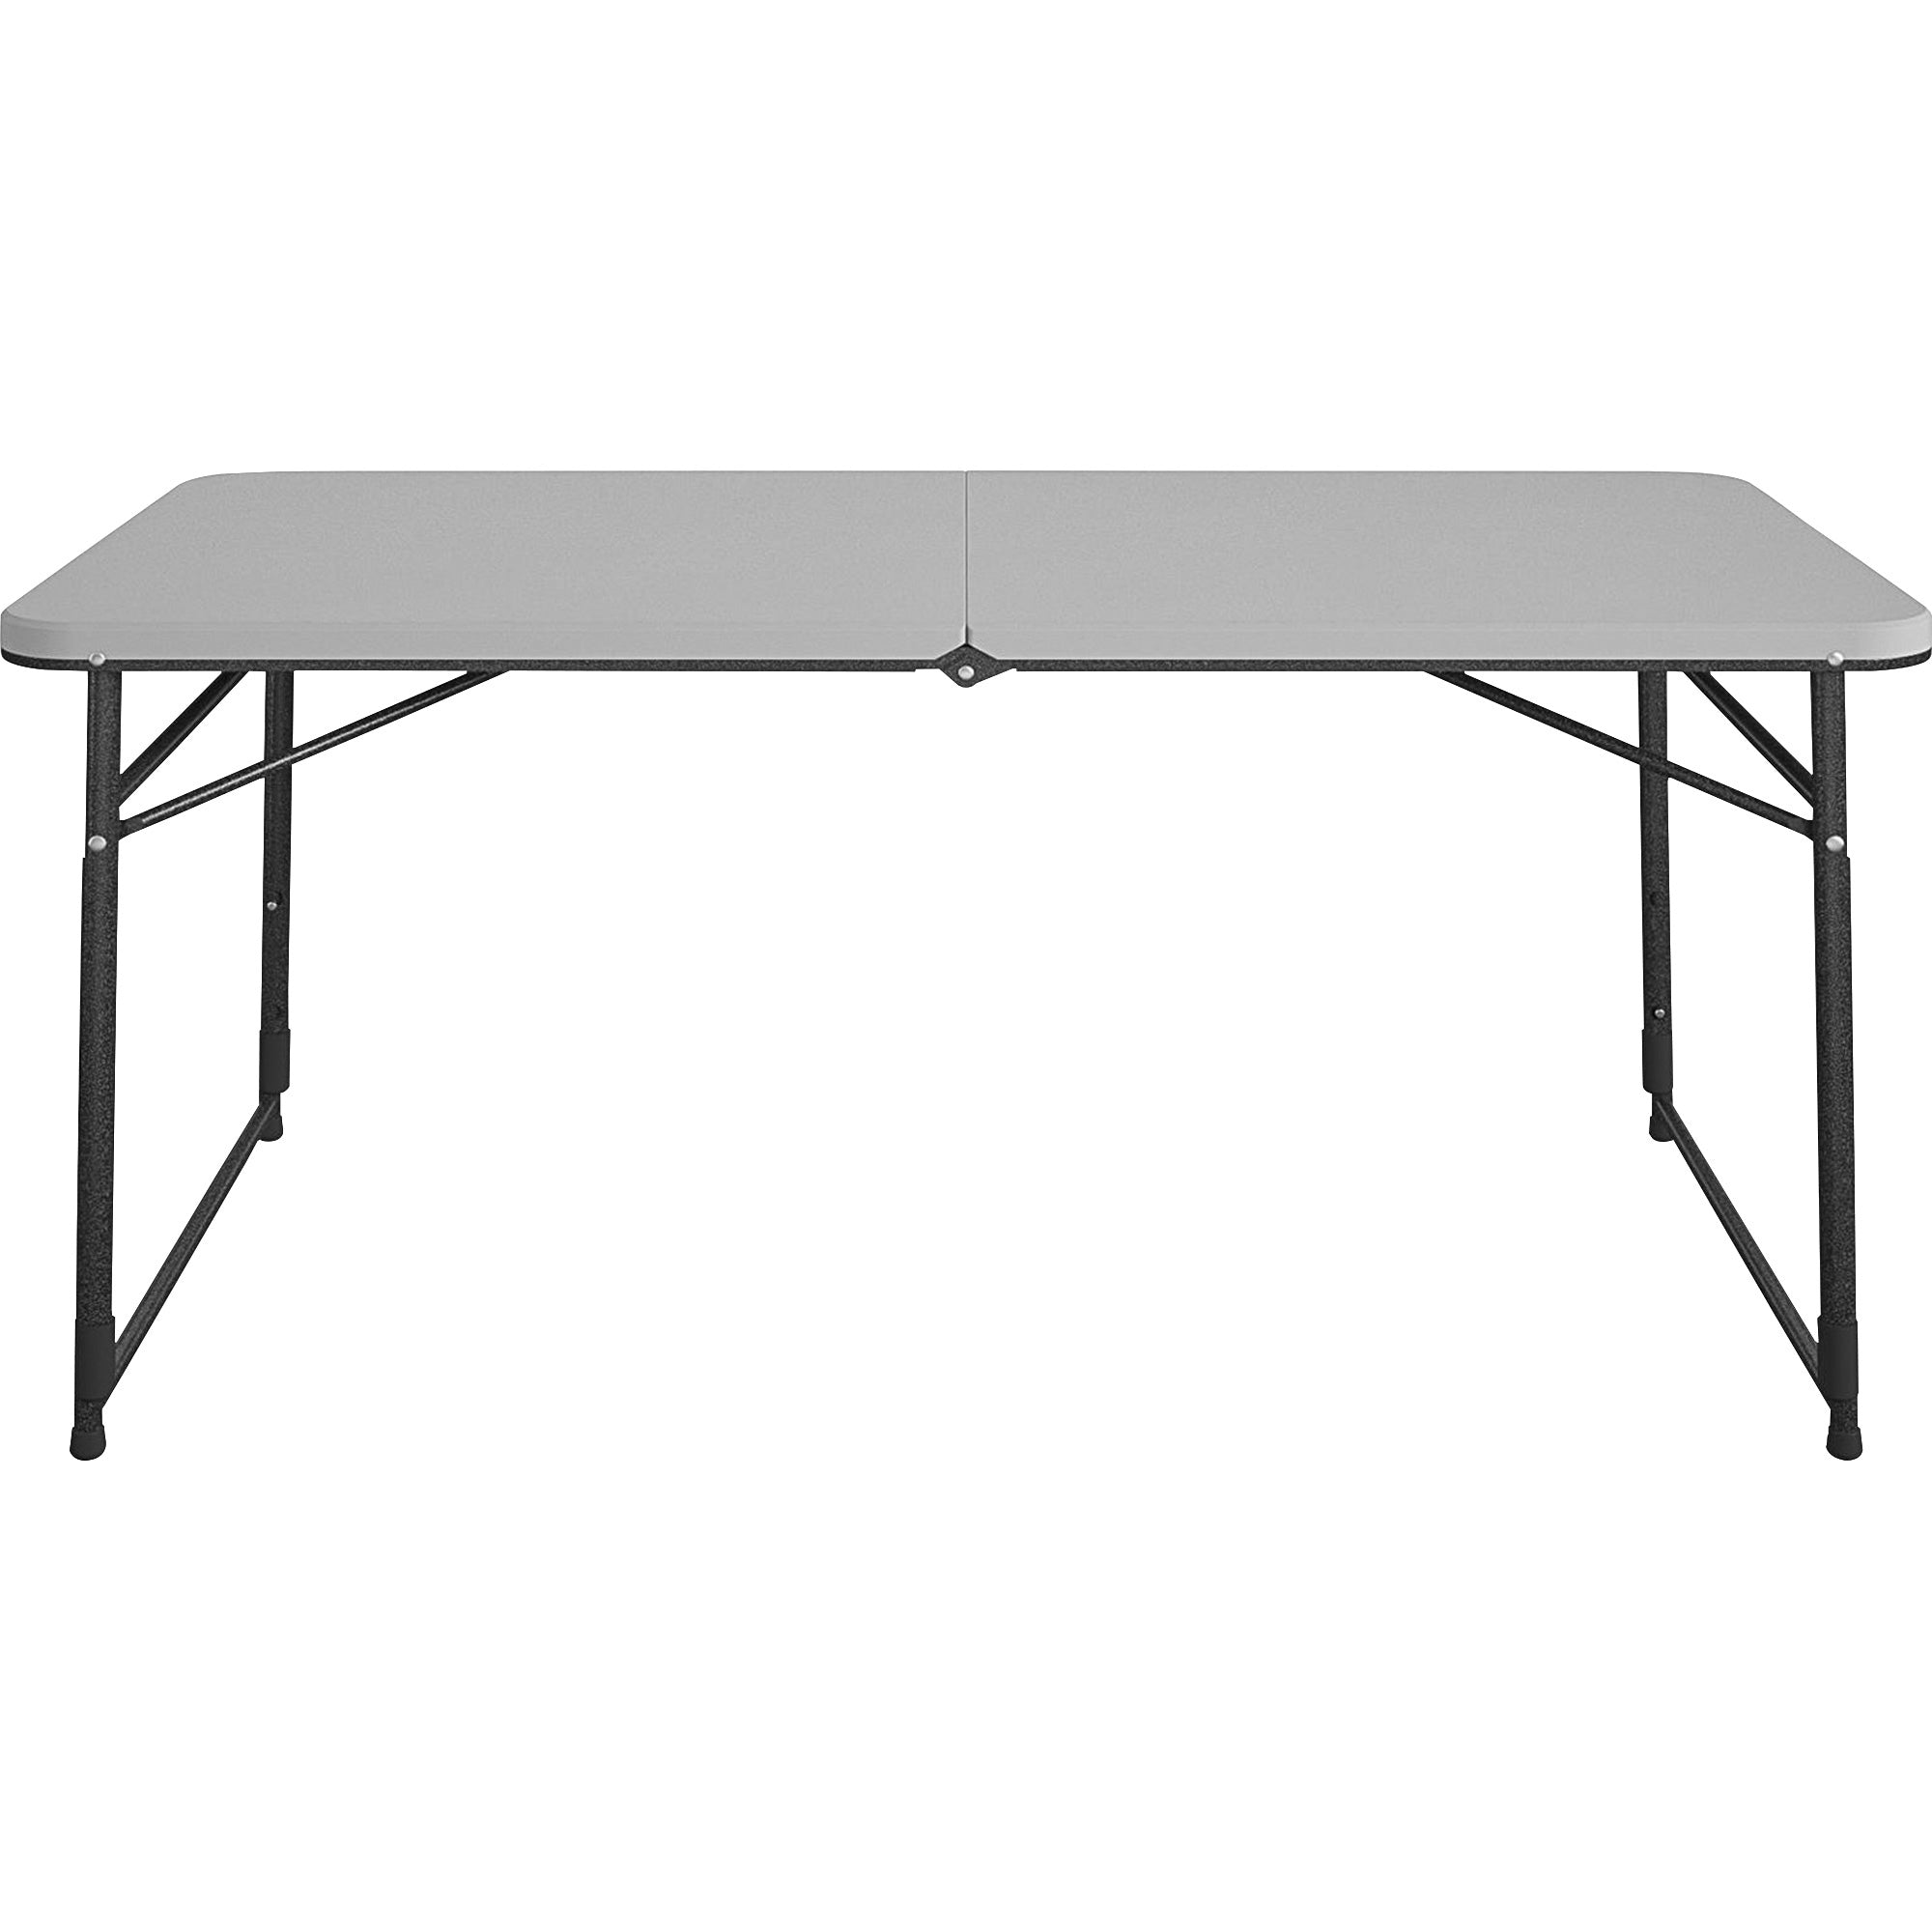 cosco-fold-portable-indoor-outdoor-utility-table-200-lb-capacity-adjustable-height-x-48-table-top-width-x-24-table-top-depth-28-height-gray-steel-resin-1-each_csc14400gry1e - 2